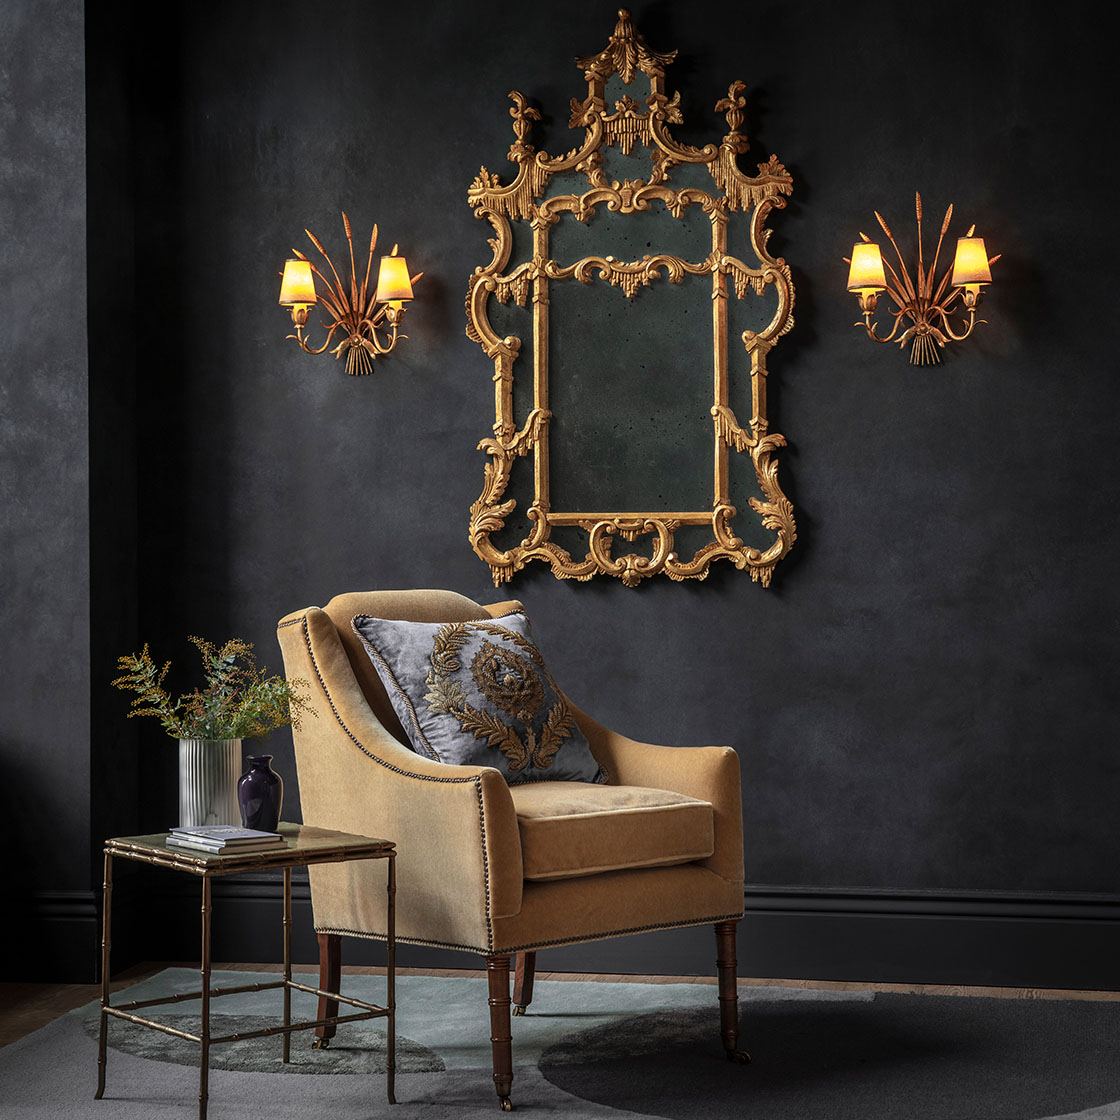 Alexandra chair in Casaleone - Fawn with Wheatsheaf wall light and Chinoiserie mirror - Beaumont & Fletcher